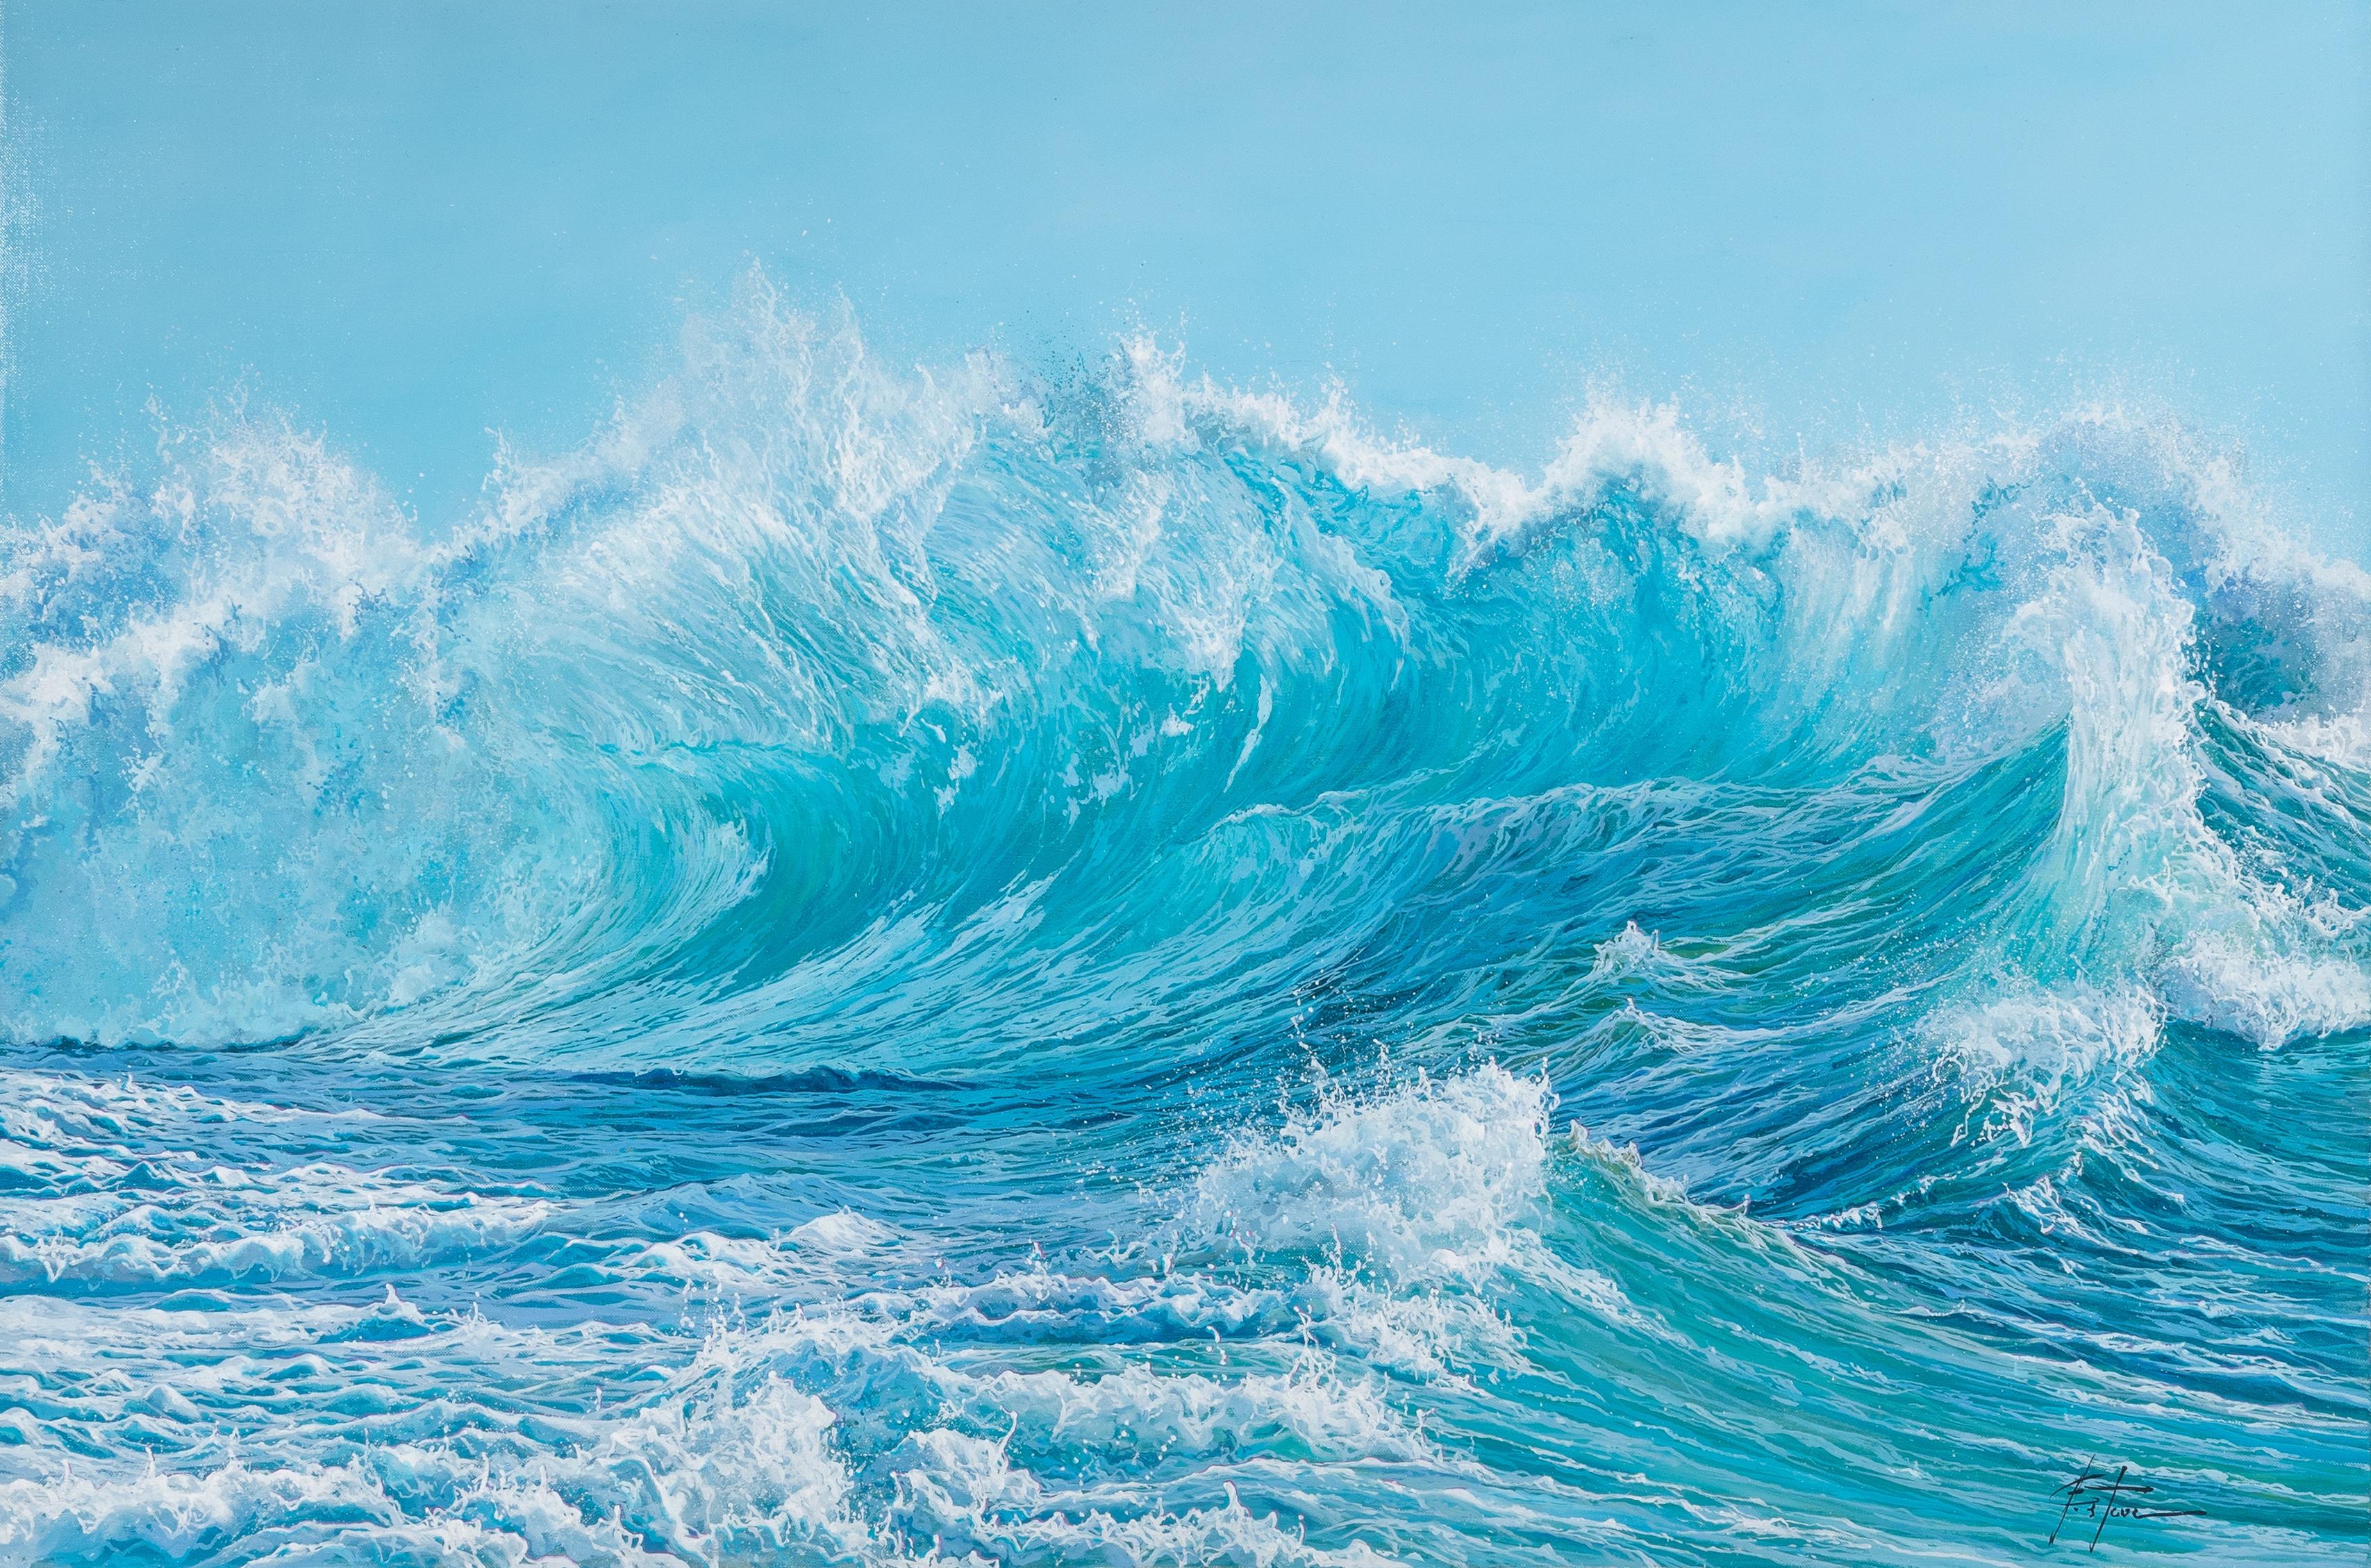 'Roaring seas' Contemporary powerful blue seascape painting of a crashing wave - Painting by Marc Esteve